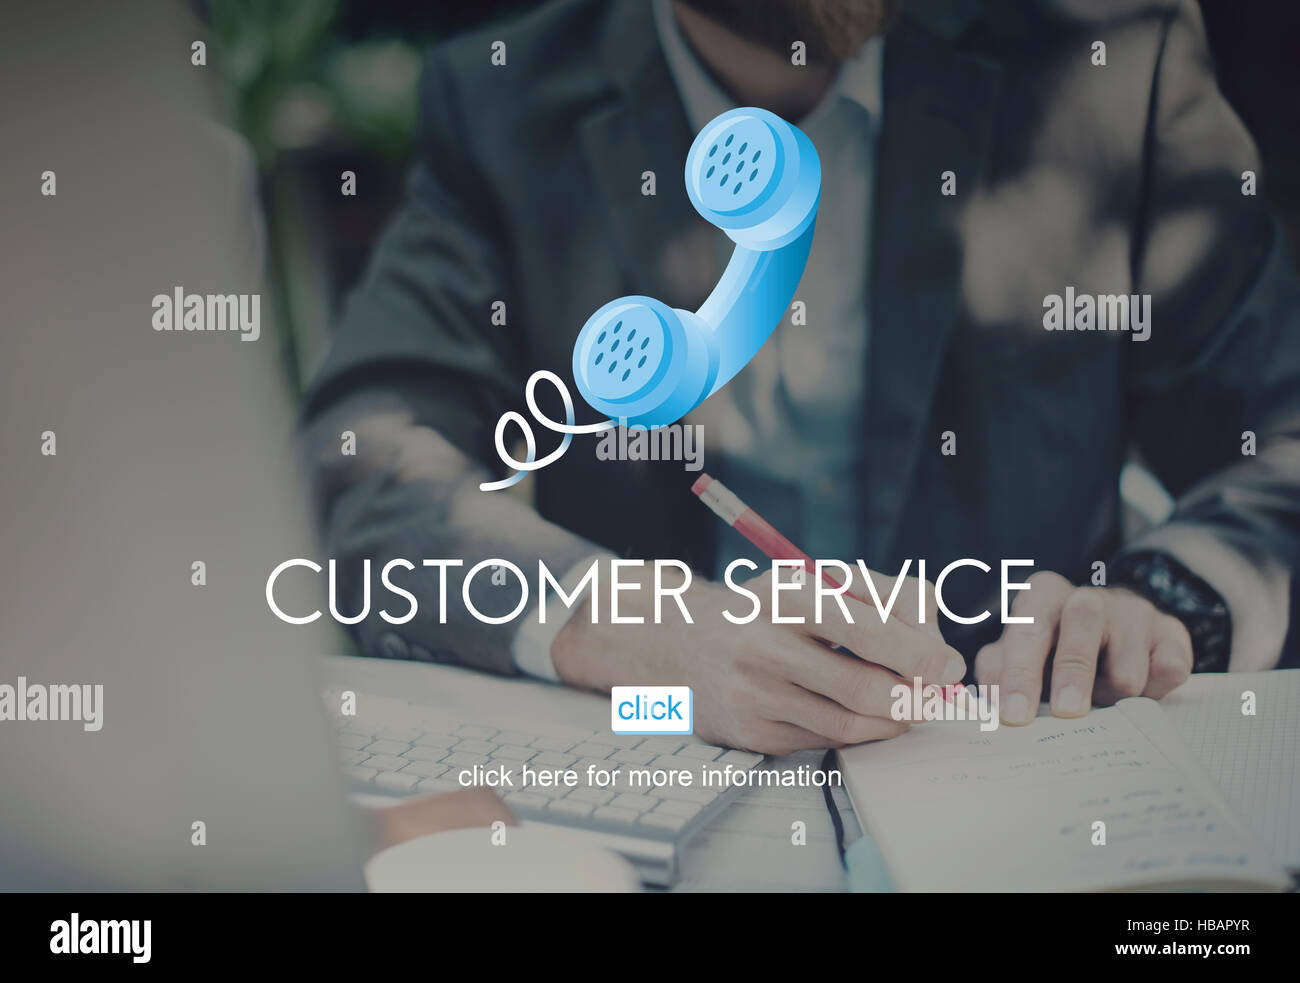 Customer Support Service Care Consumer Client Concept Stock Photo